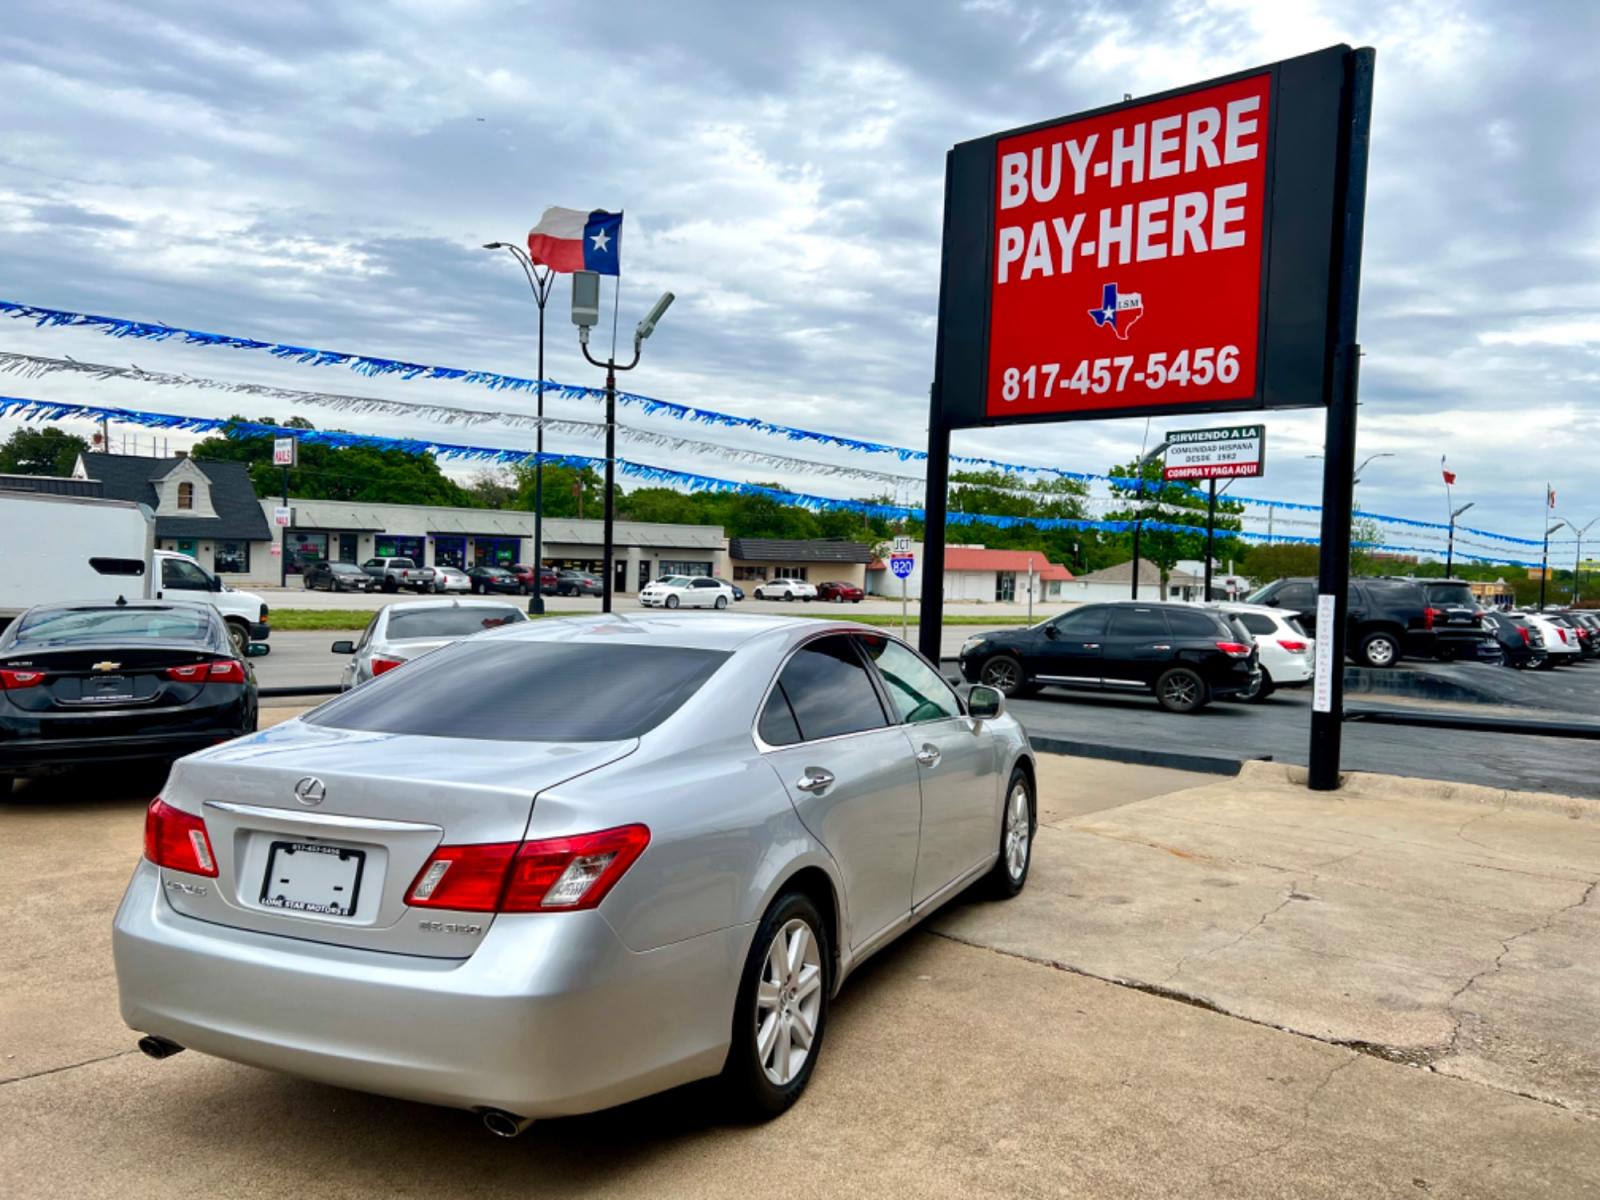 2007 SILVER LEXUS ES 350 BASE (JTHBJ46G072) , located at 5900 E. Lancaster Ave., Fort Worth, TX, 76112, (817) 457-5456, 0.000000, 0.000000 - CASH CAR ONLY, NO FINANCING AVAILABLE. WE'VE SLASHED THE PRICE! NOW ONLY $5,391! THIS 2007 LEXUS ES 350 BASE 4 DOOR SEDAN RUNS AND DRIVES GREAT. IT IS EQUIPPED WITH A CD PLAYER, AM/FM RADIO AND AN AUX PORT. THE TIRES ARE IN GOOD CONDITION AND STILL HAVE TREAD LEFT ON THEM. THIS CAR WILL NOT LAST S - Photo #5